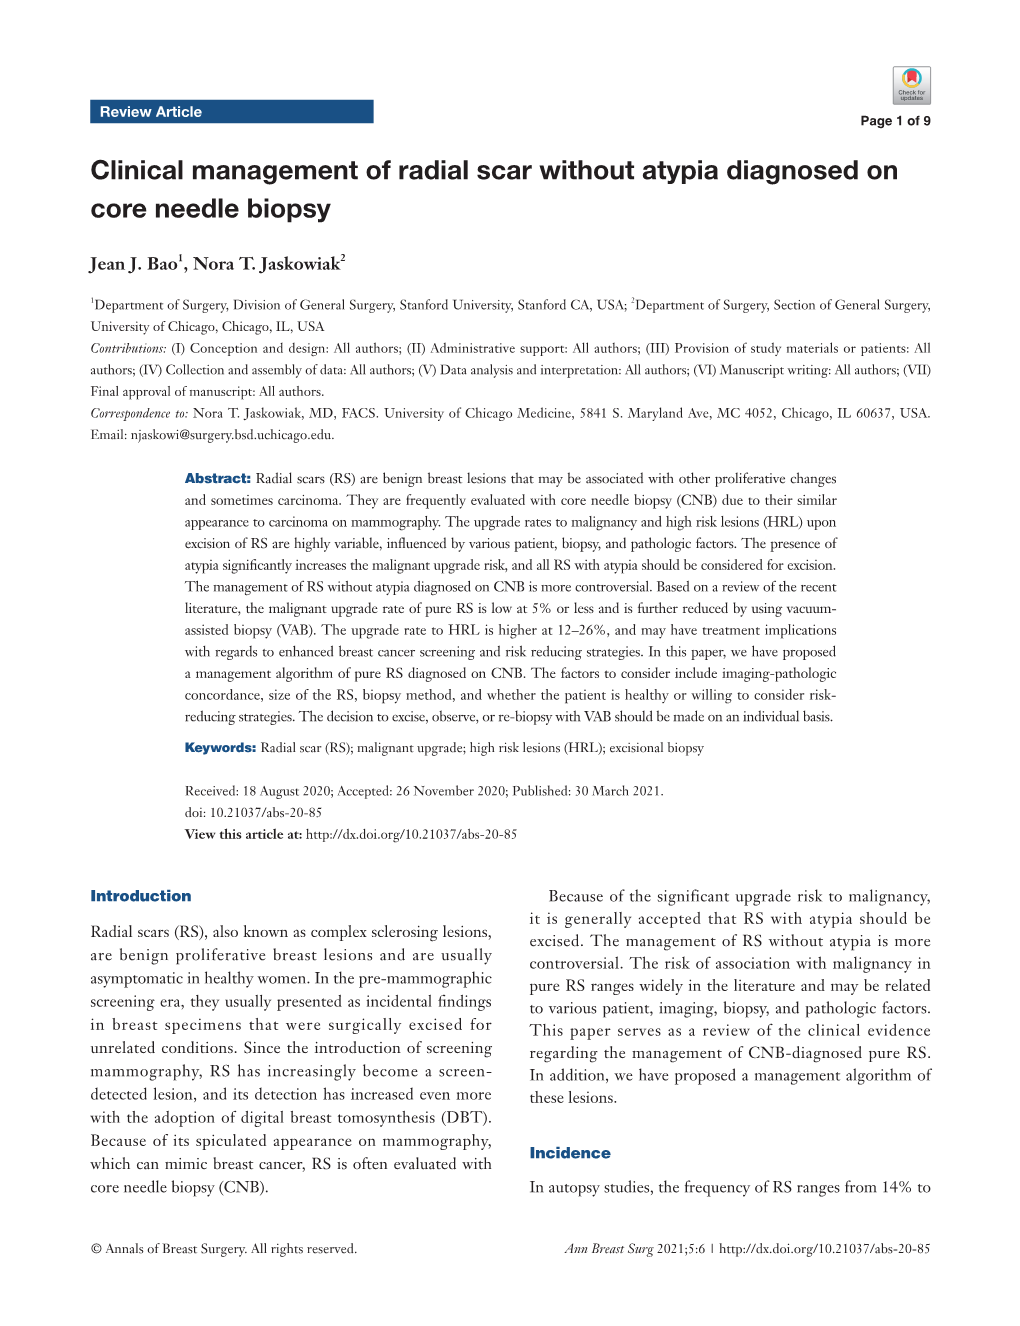 Clinical Management of Radial Scar Without Atypia Diagnosed on Core Needle Biopsy